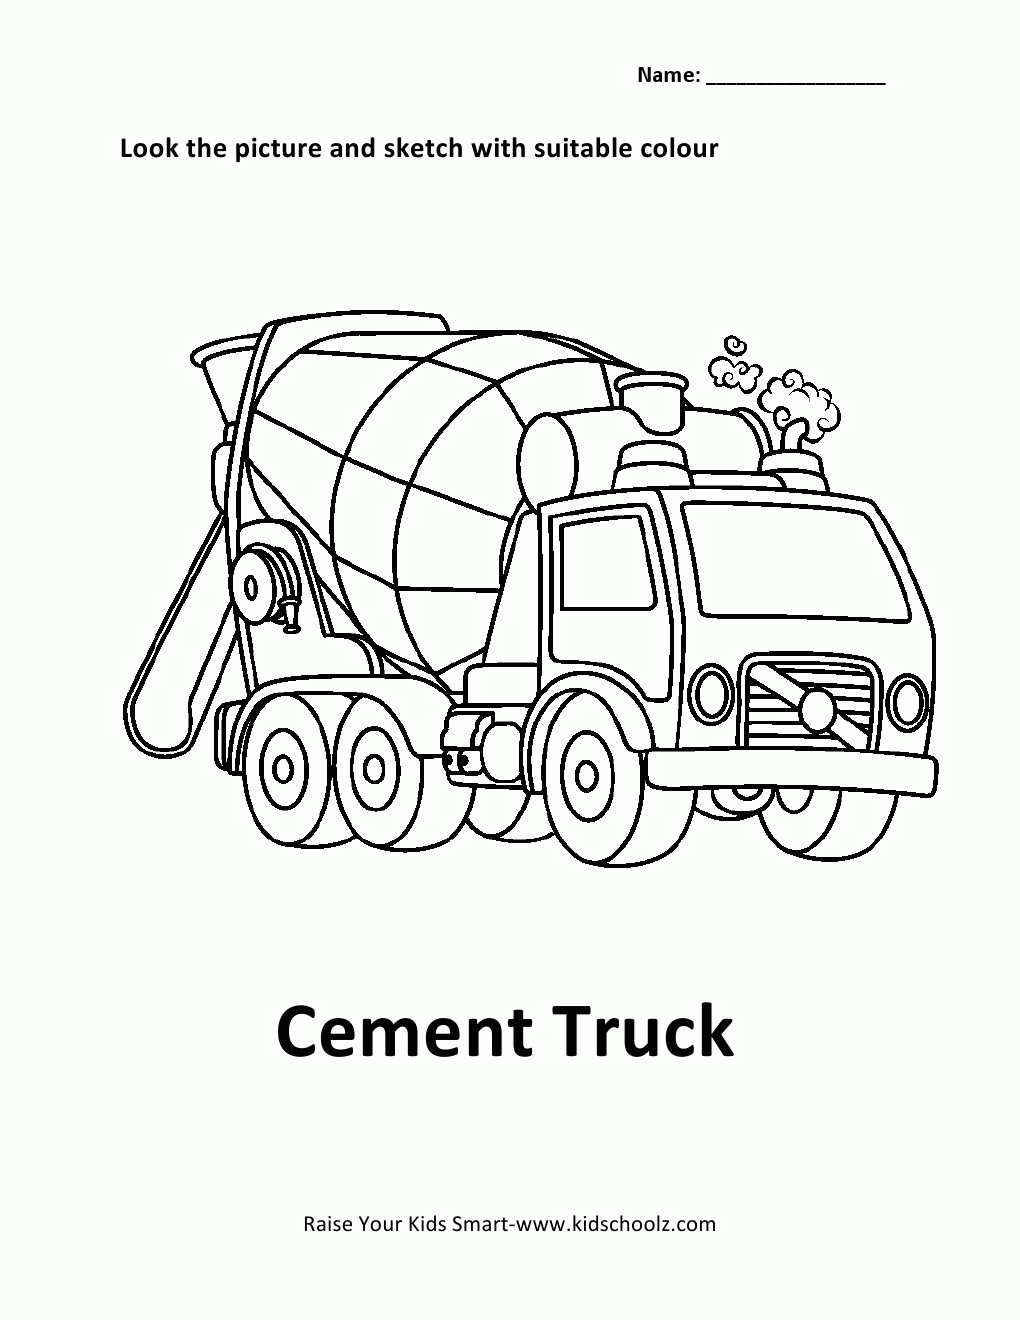 Vehicles Colouring Worksheet - Cement Truck -